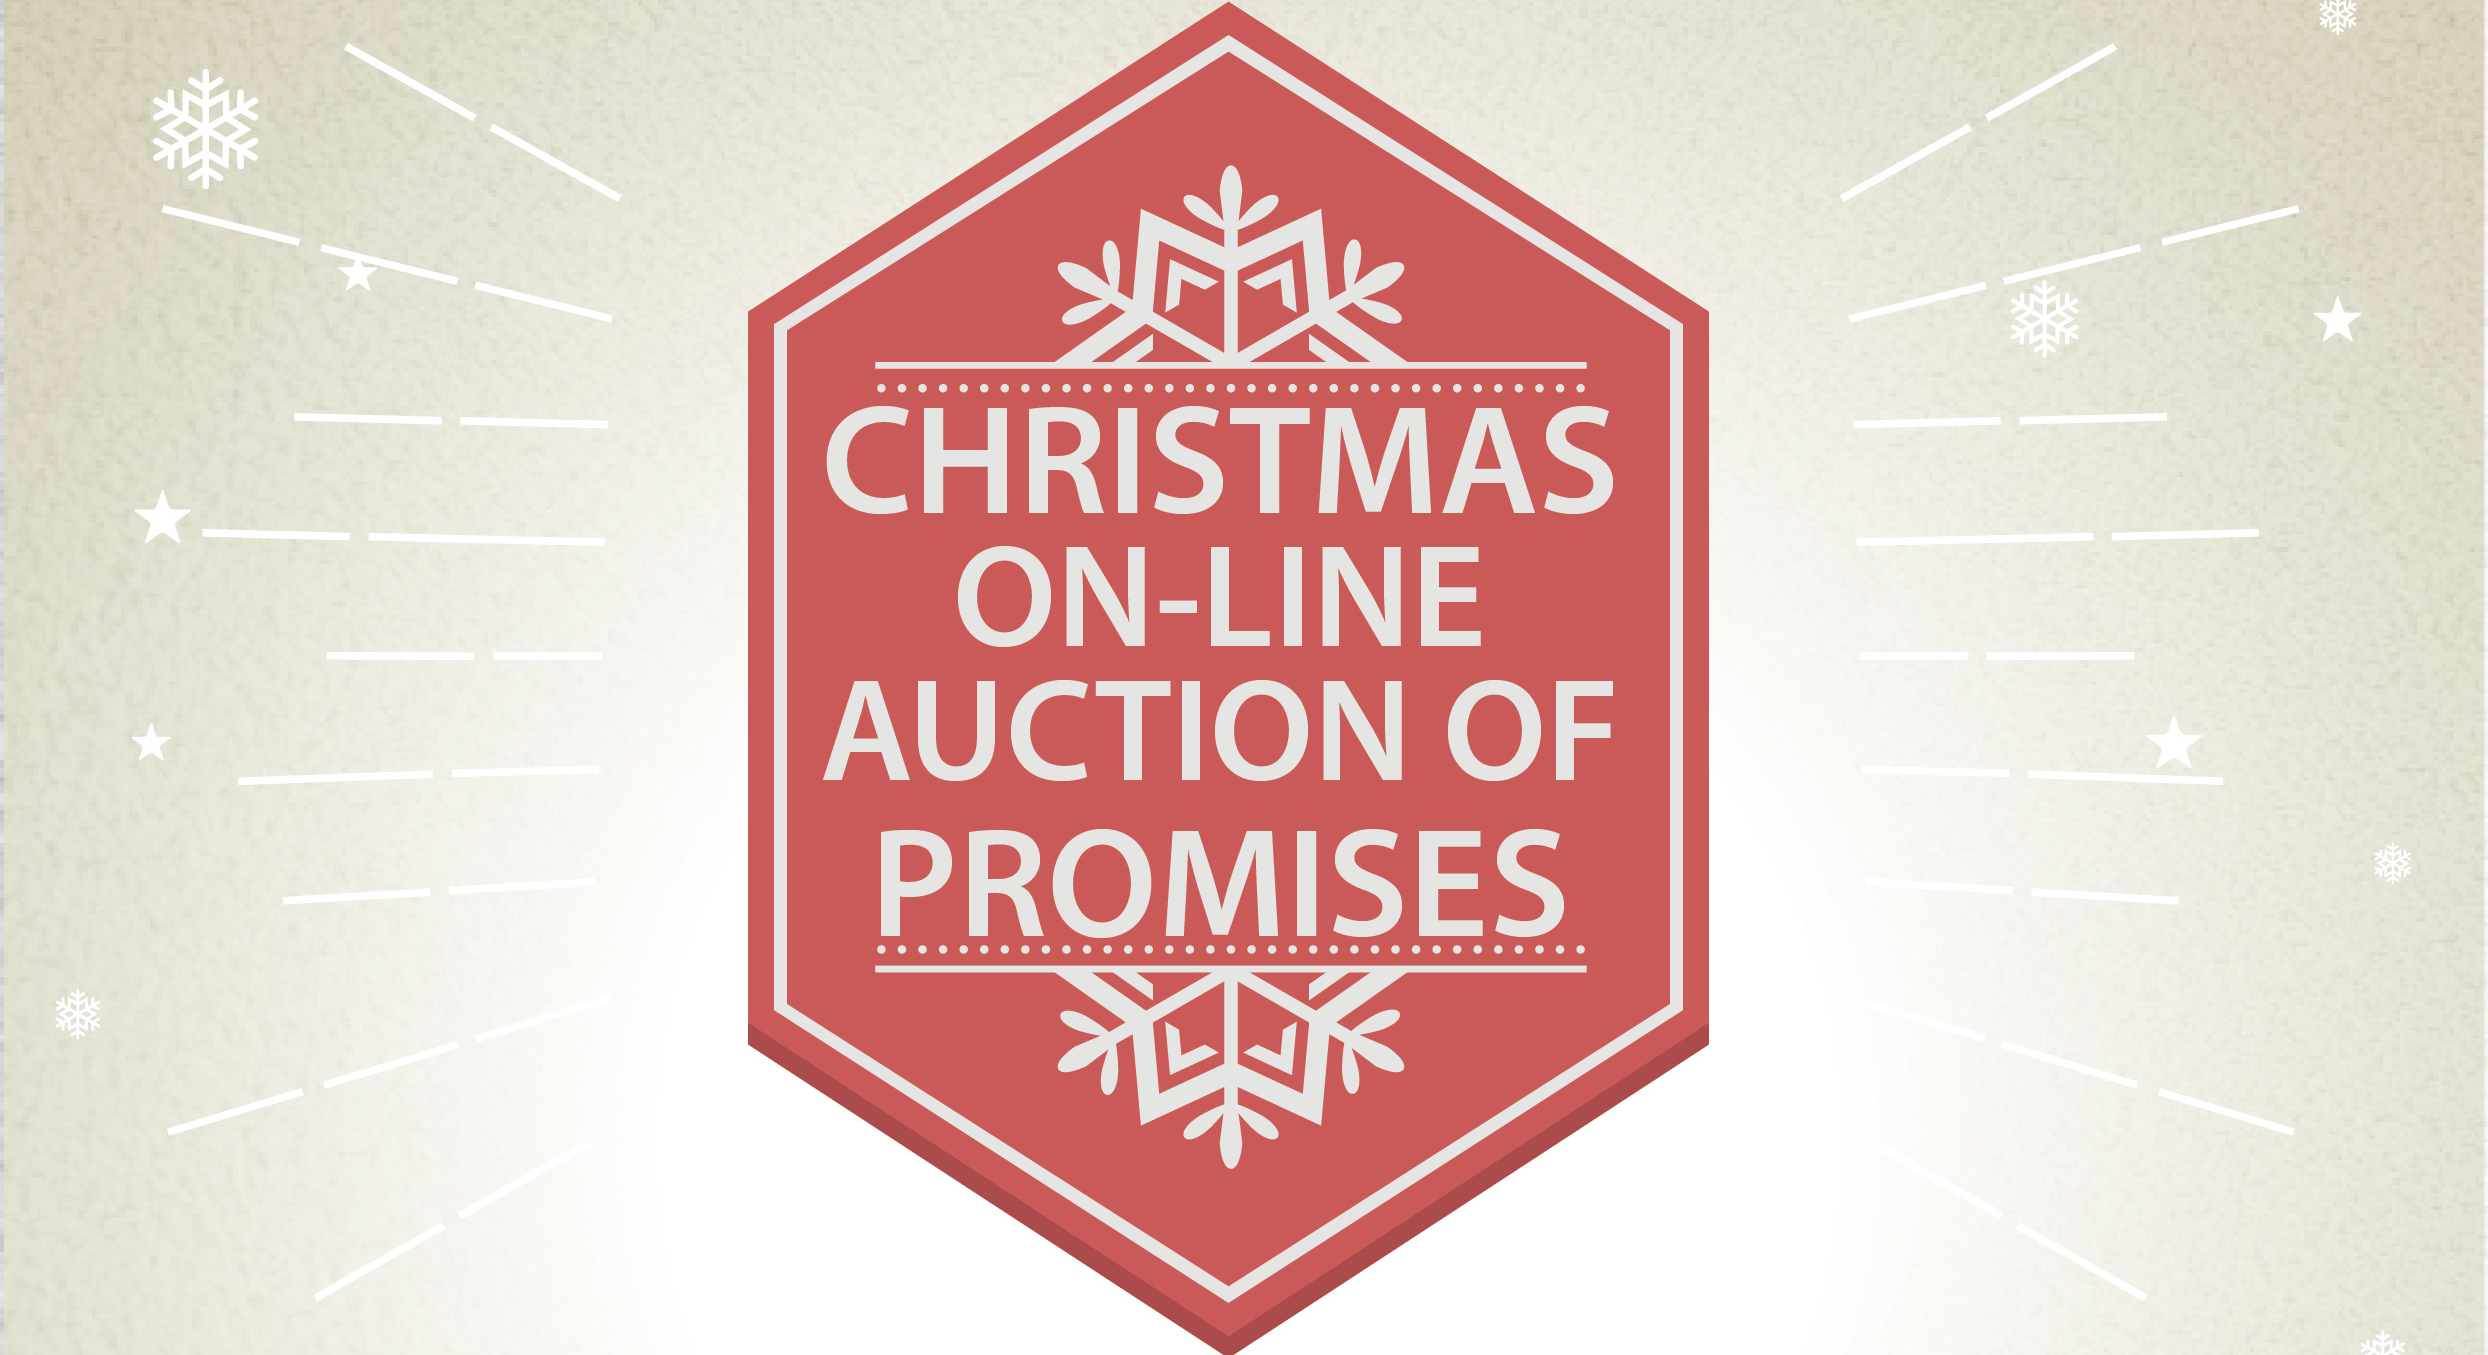 You are currently viewing Auction of Promises